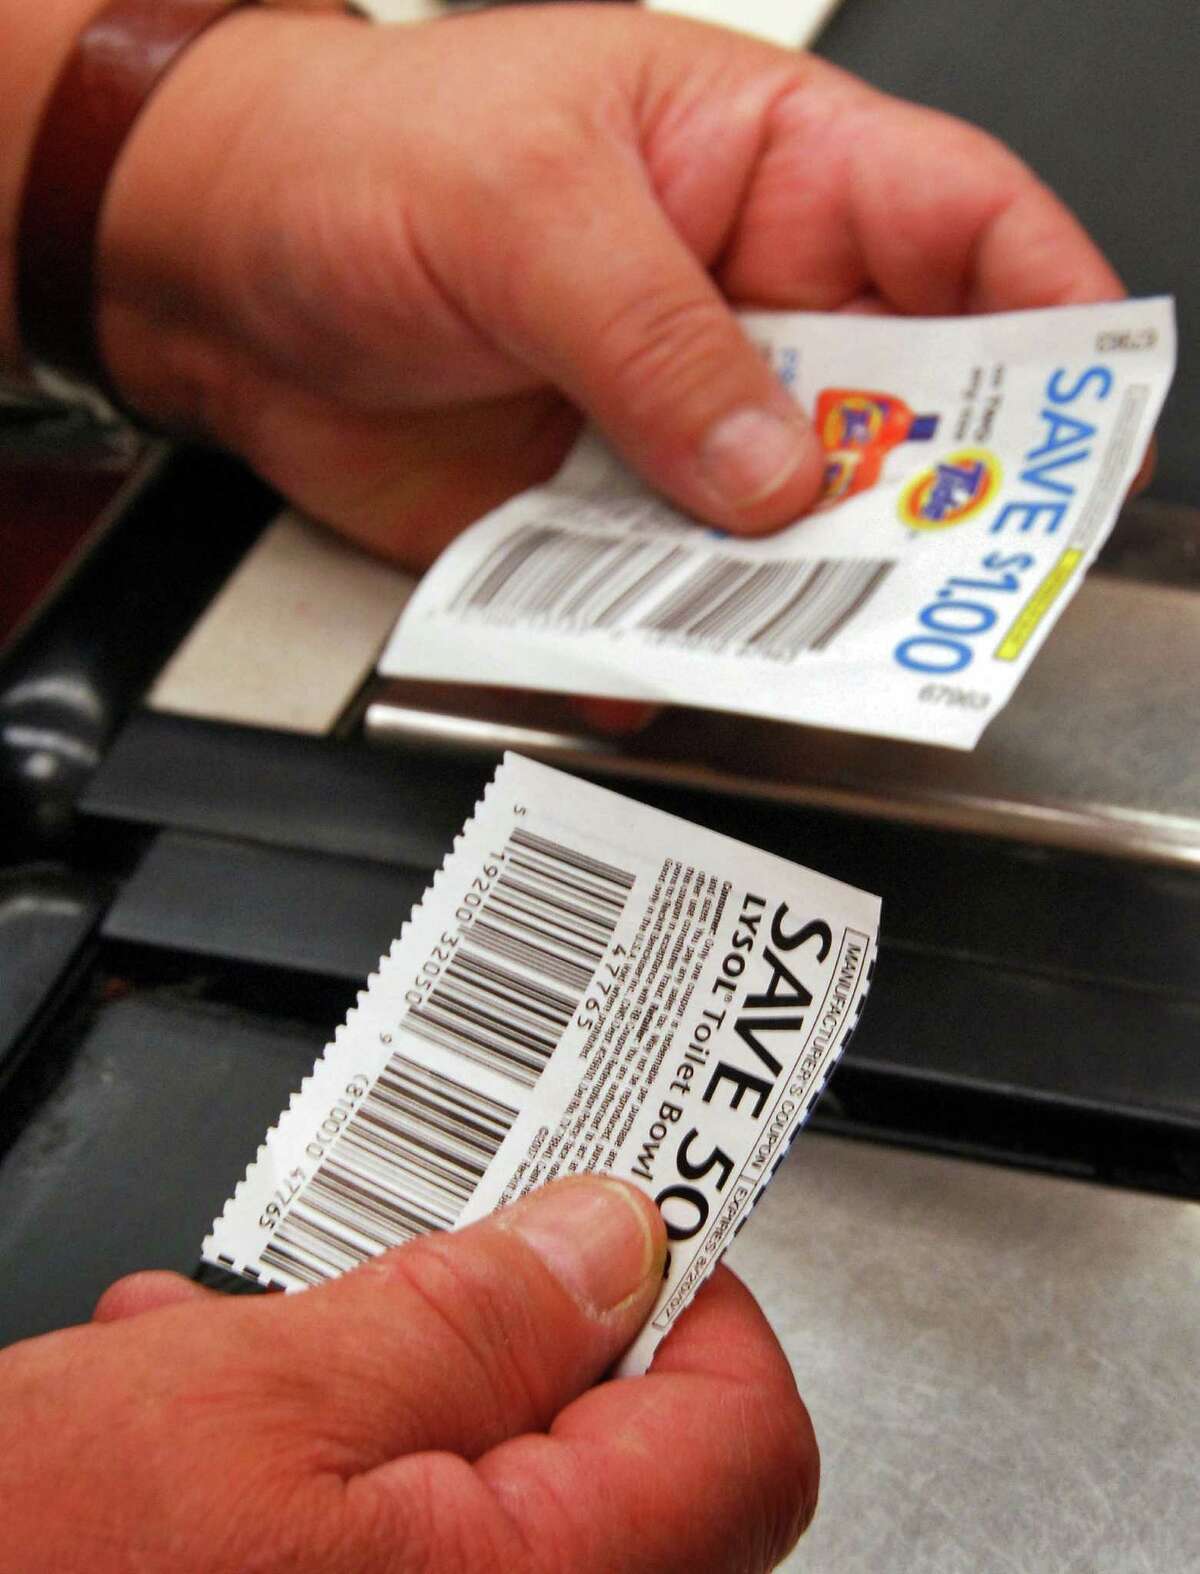 New to couponing? Be sure to study up on your favorite store's coupon policy.